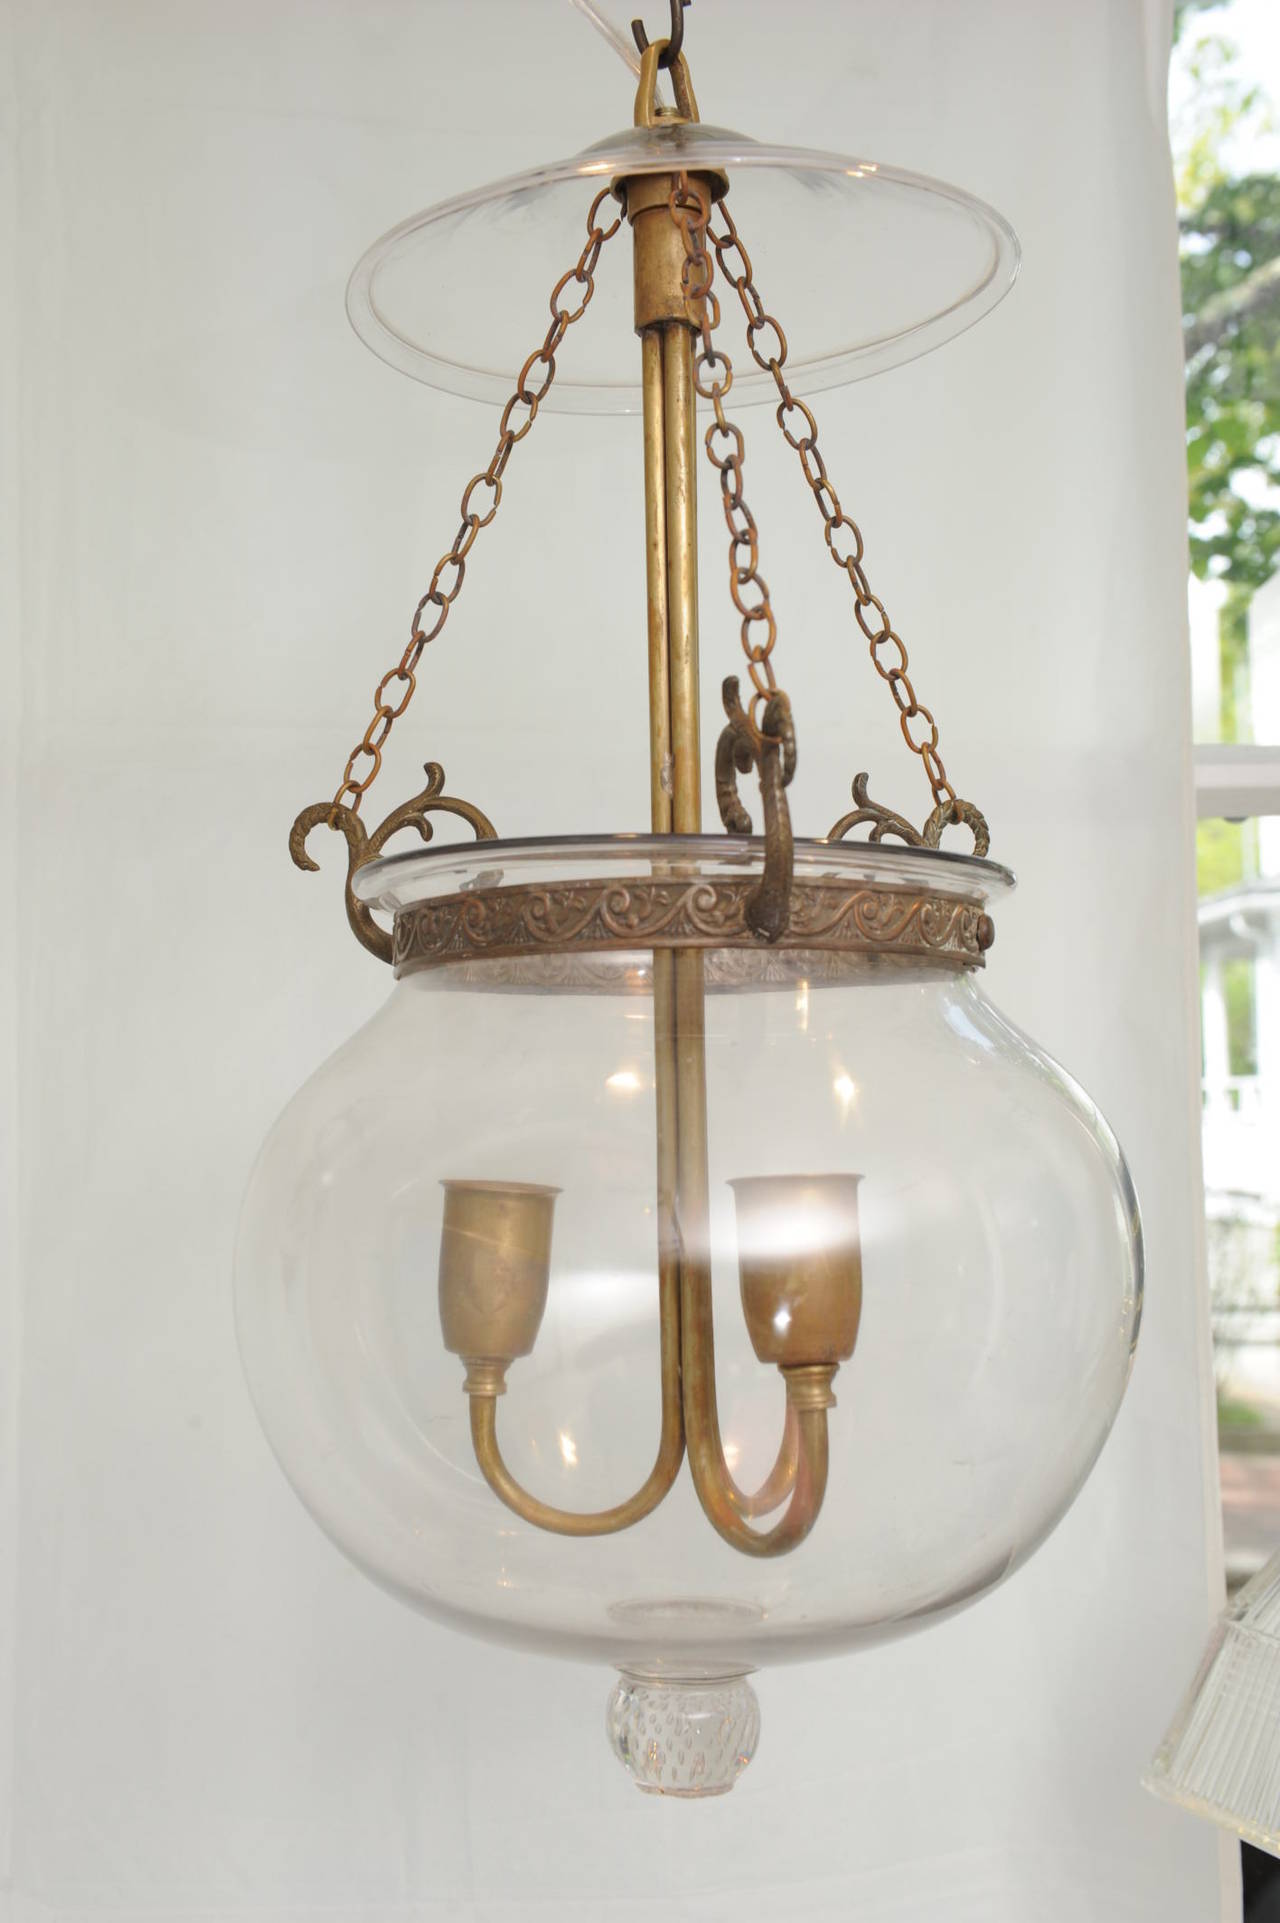 A fabulous, unusual hall lantern with lovely brass hardware, complete with smoke cap. Electrified for modern use, handblown, English, from the late 1800s.

Bell jar hall lanterns, stop located on Nantucket.